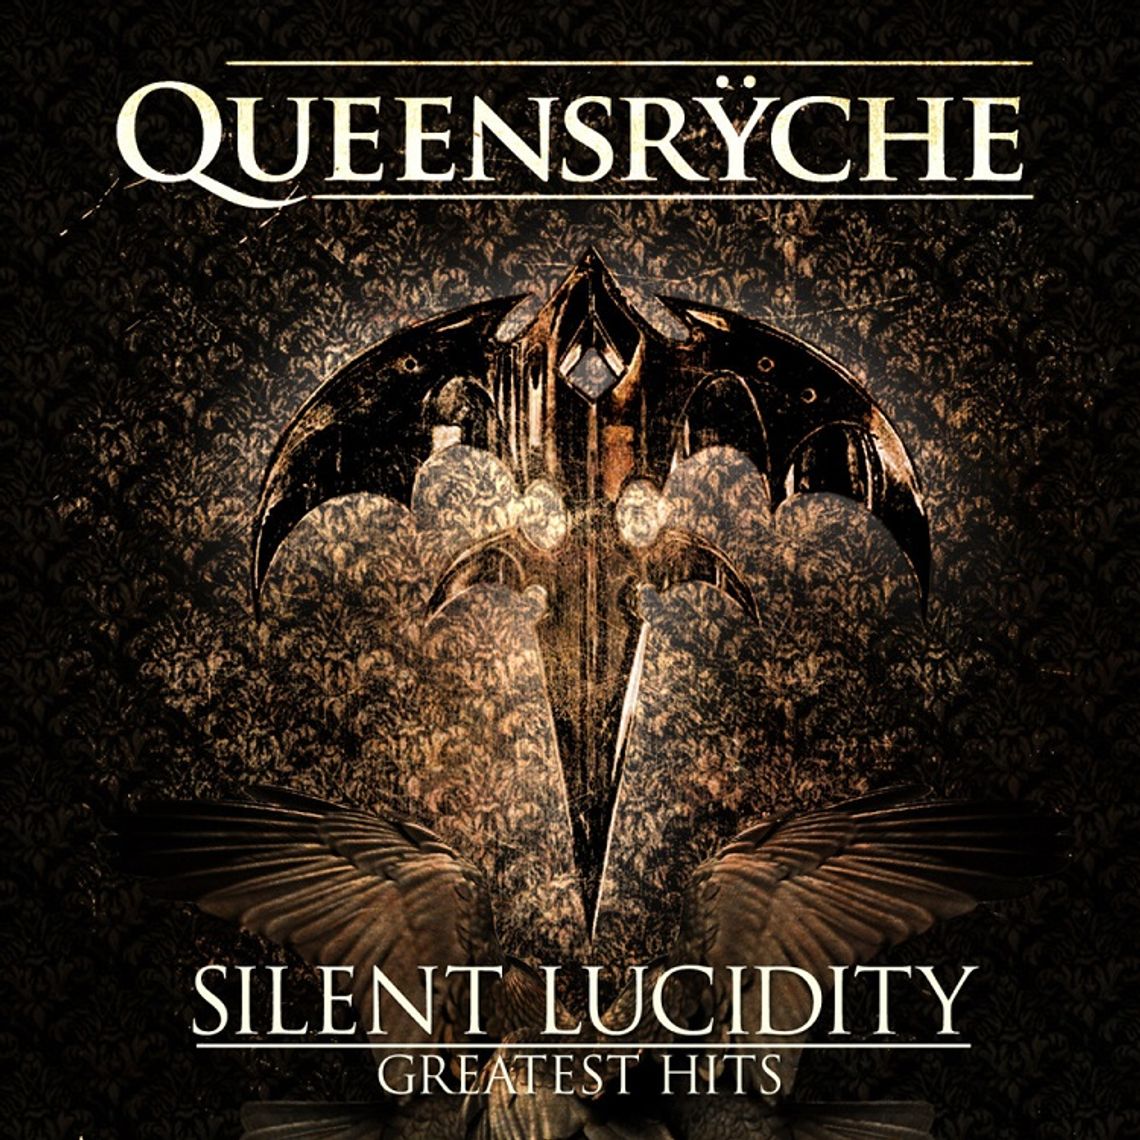 Queensryche "Silent lucidity"